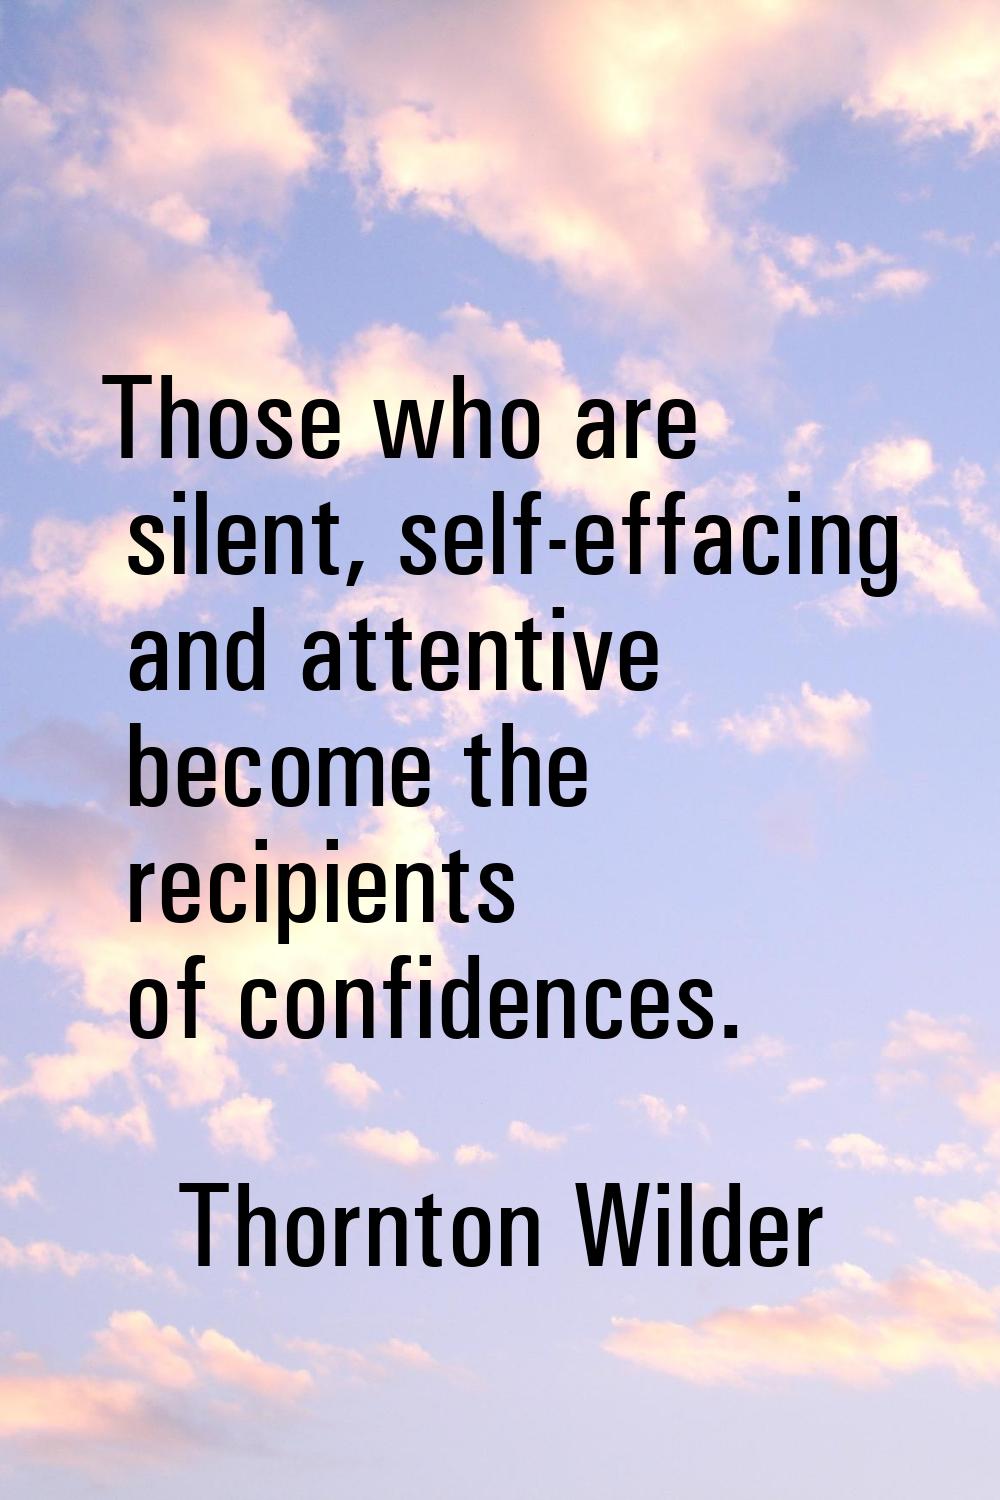 Those who are silent, self-effacing and attentive become the recipients of confidences.